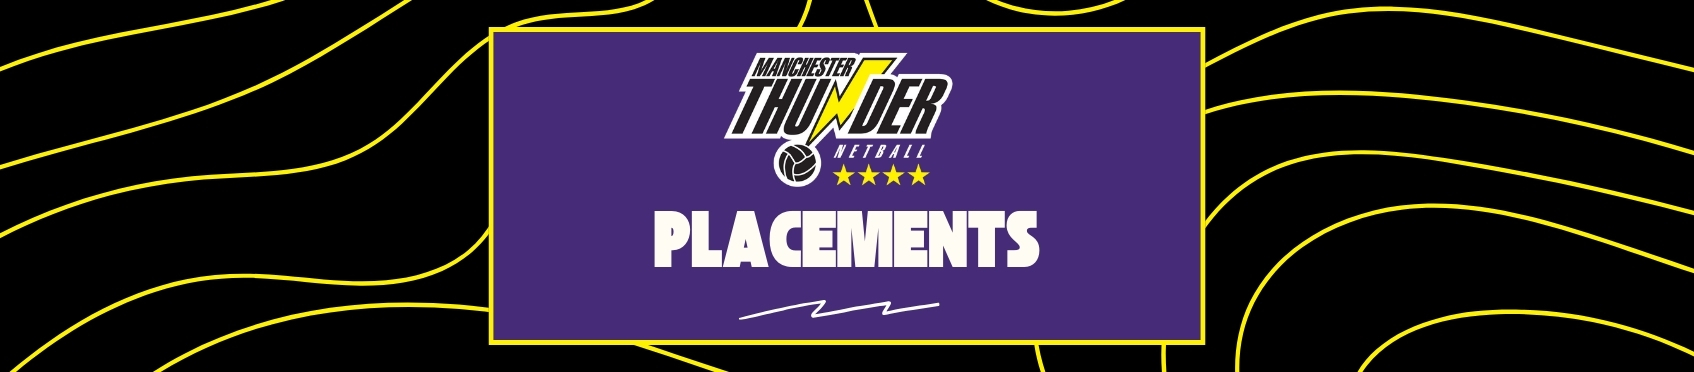 Manchester Thunder Placements